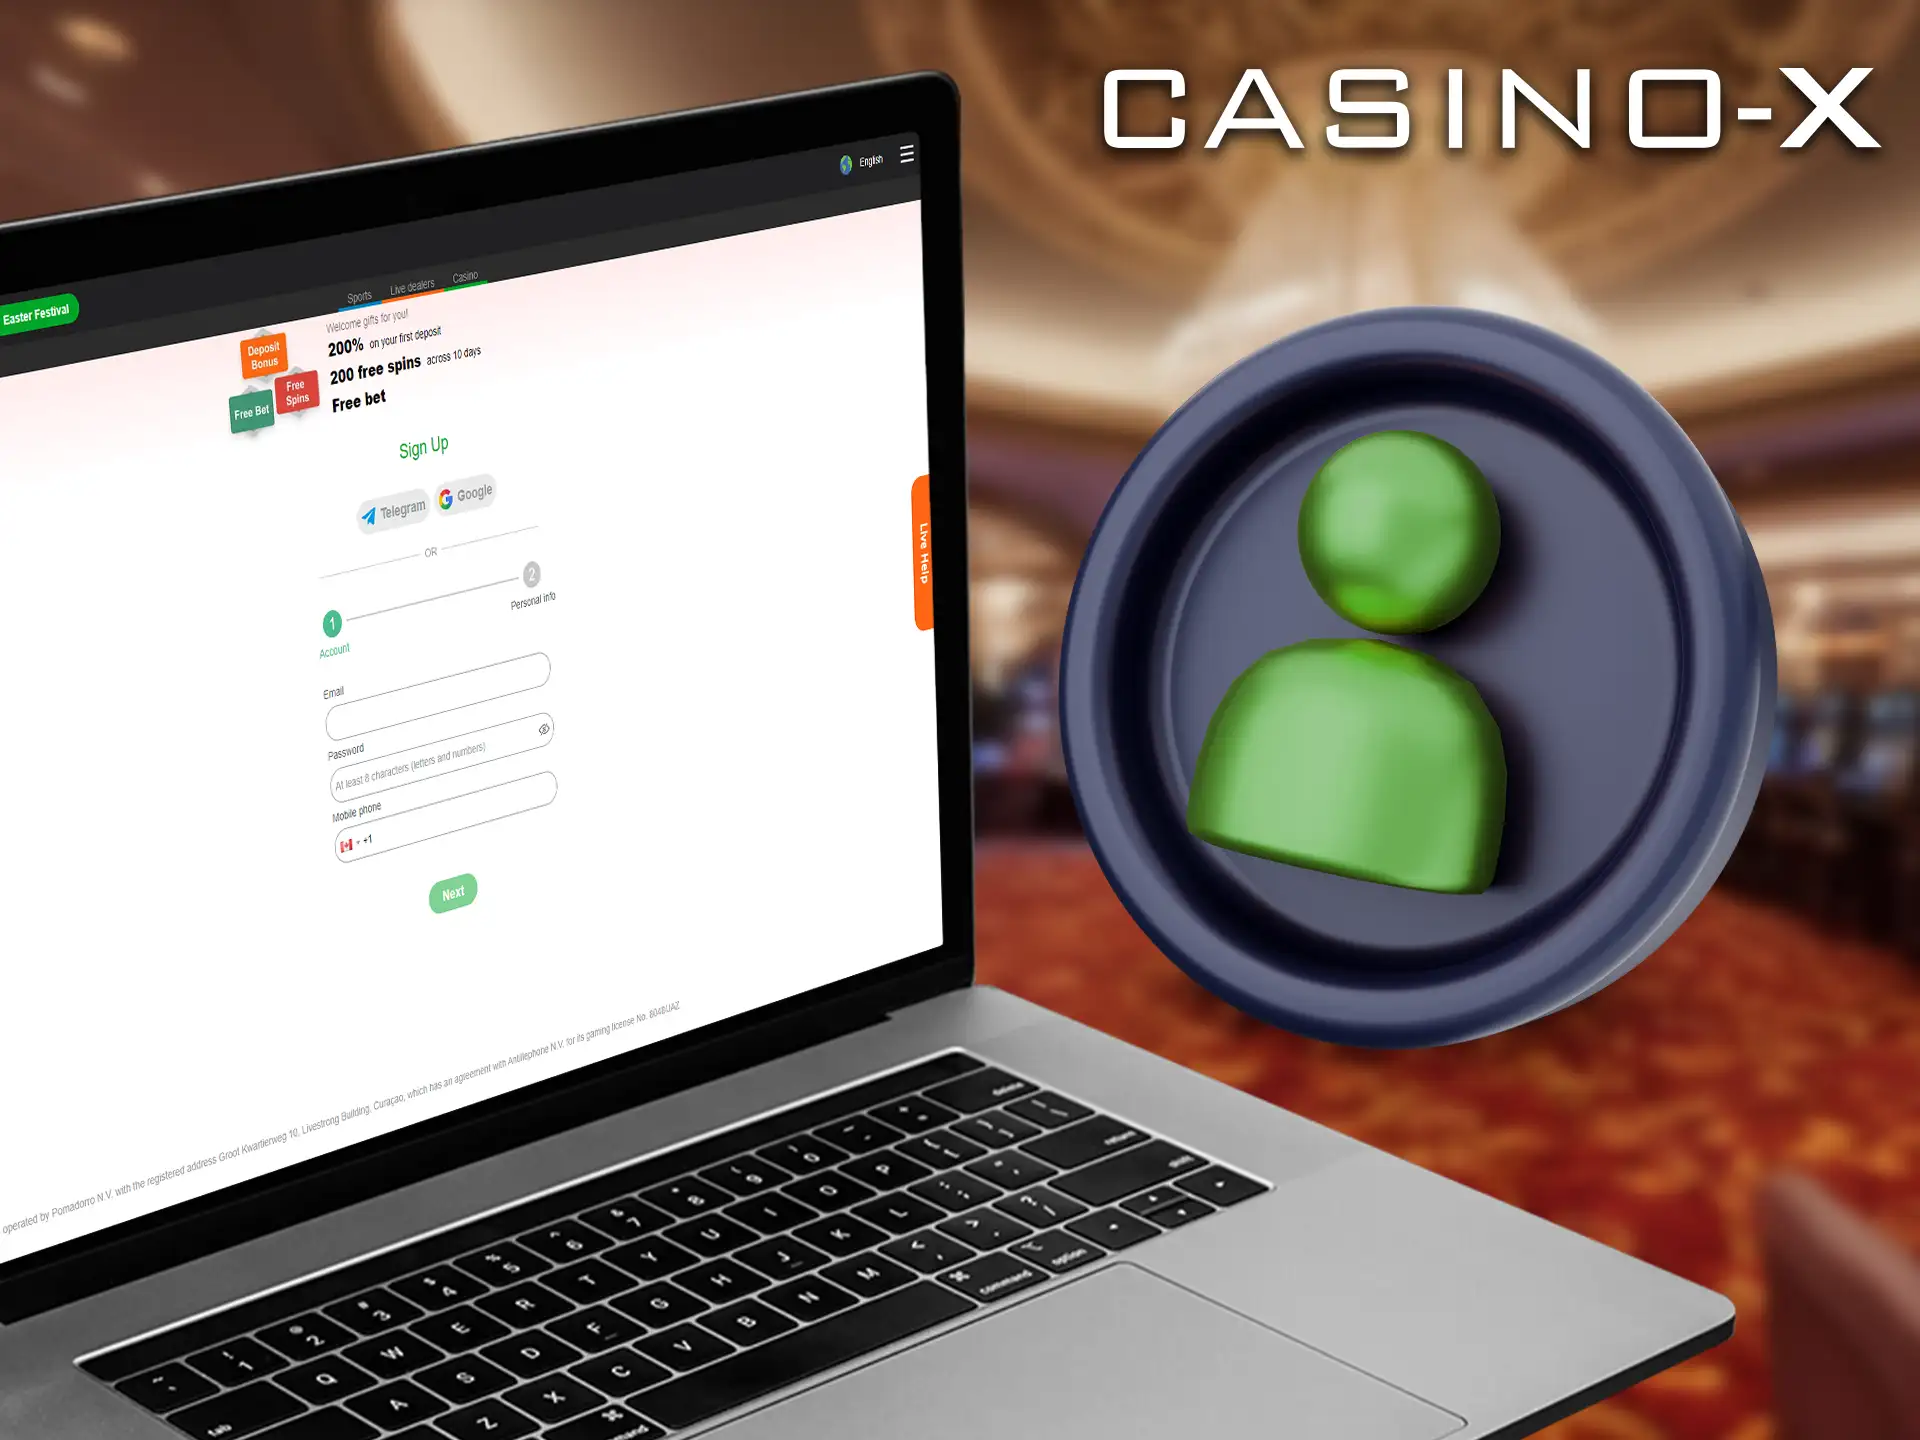 Creating an account is easy and free, giving you full access to the wide variety of games at Casino-X.